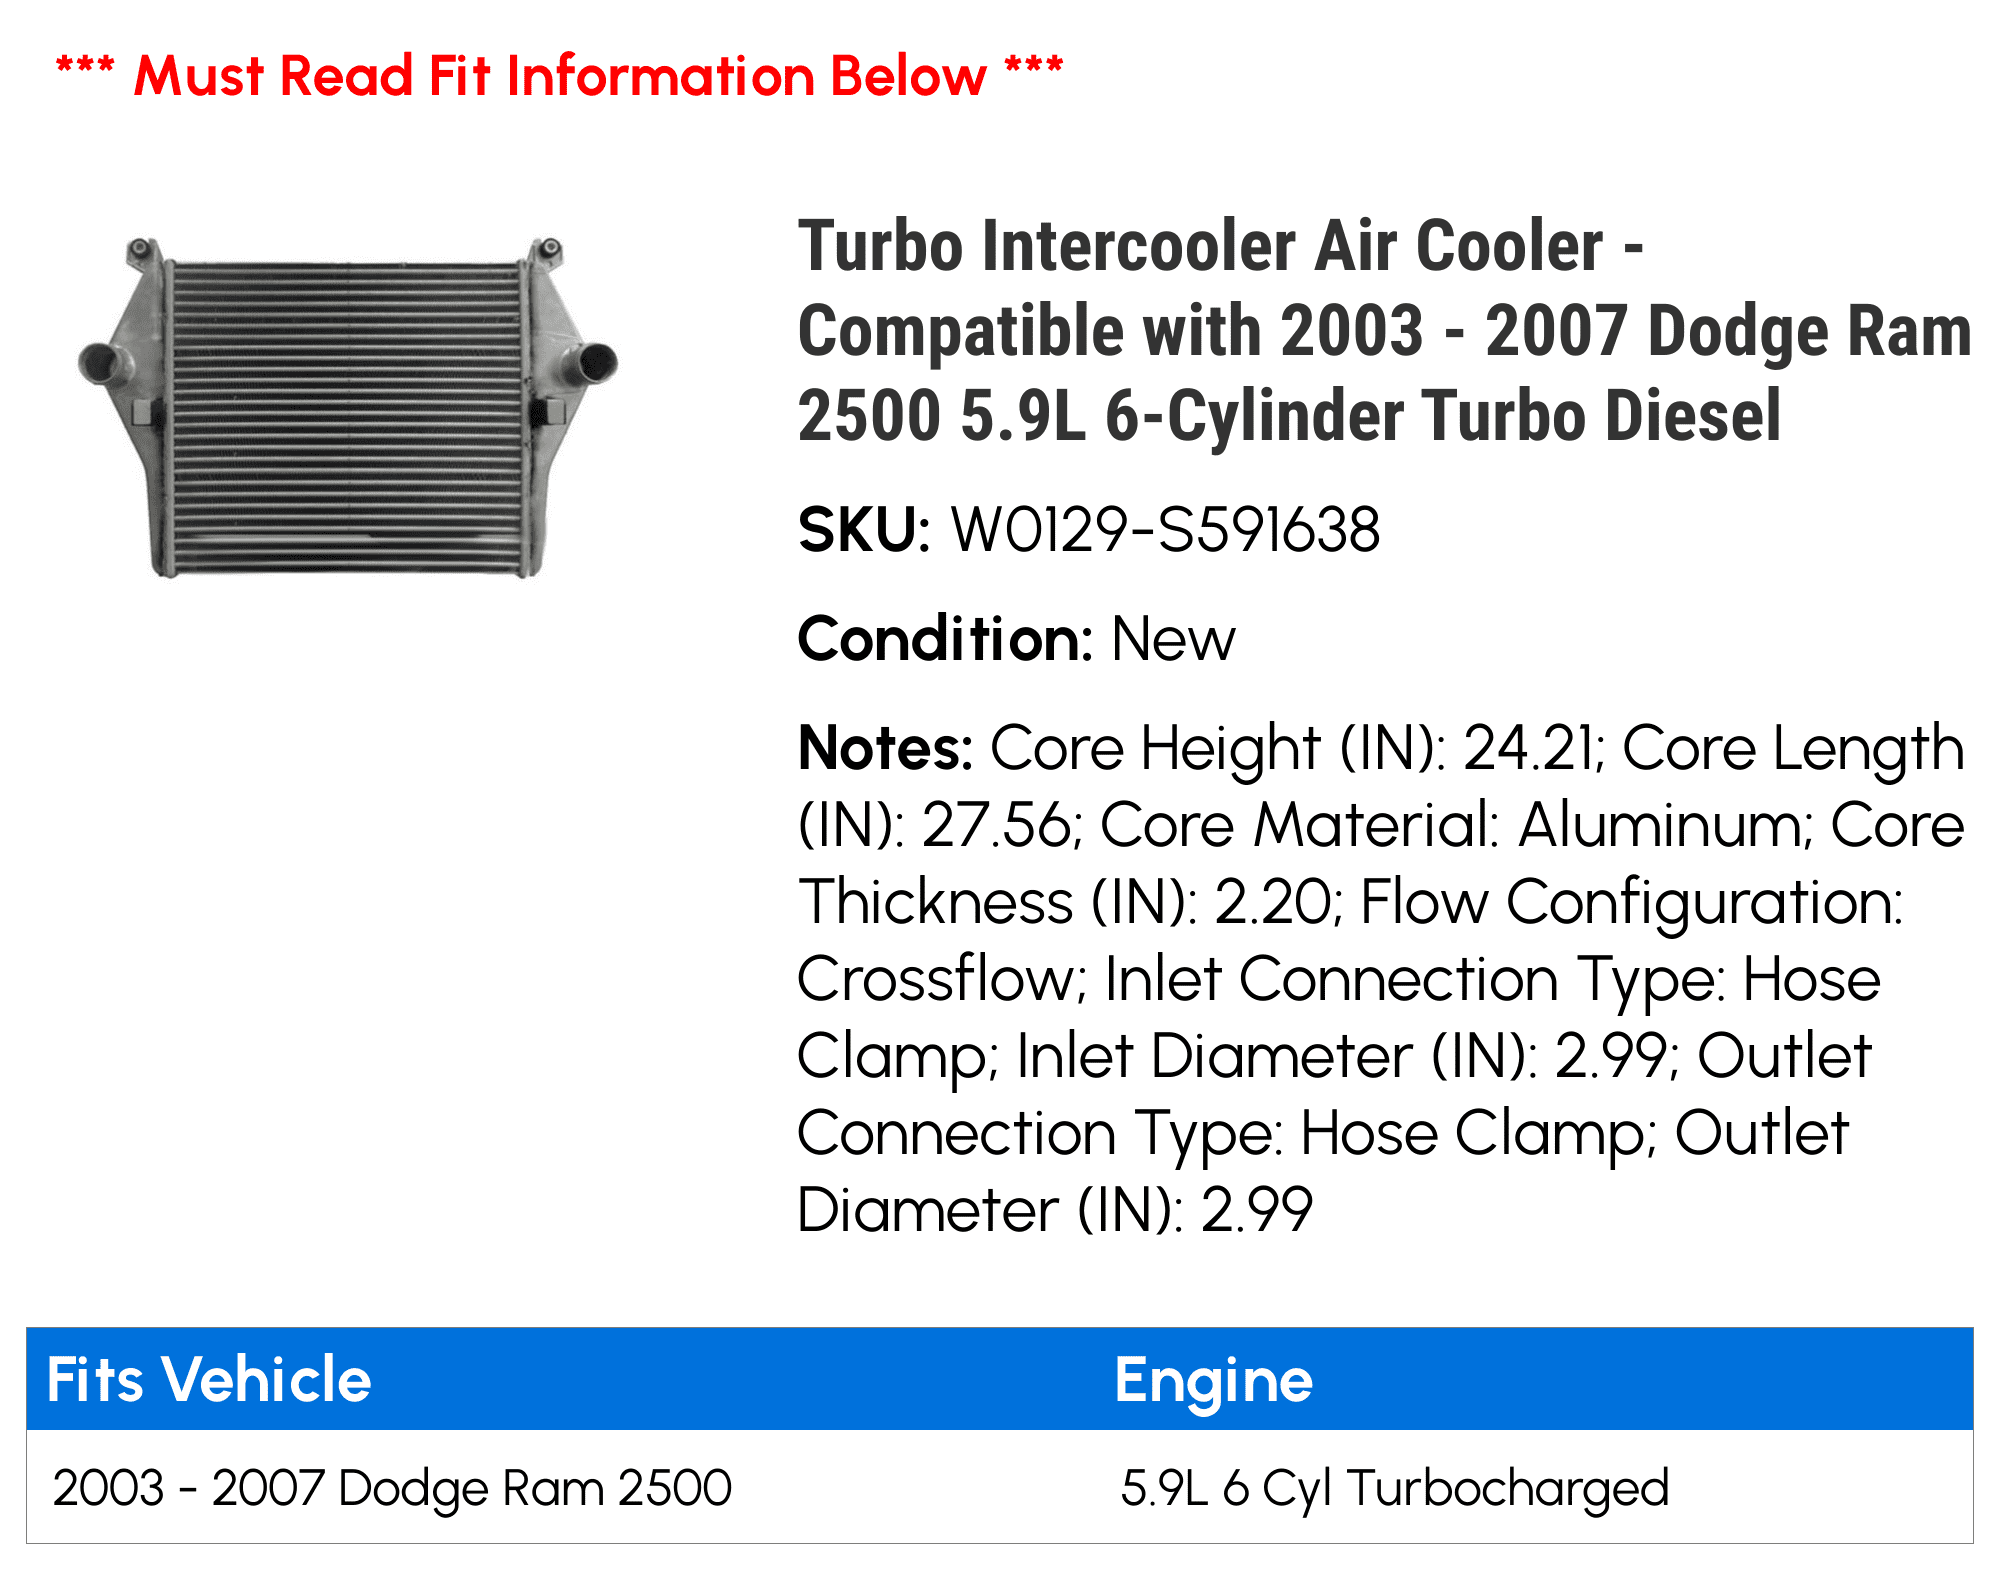 Turbo Intercooler Air Cooler Compatible with 2003-2007 Dodge Ram 3500 